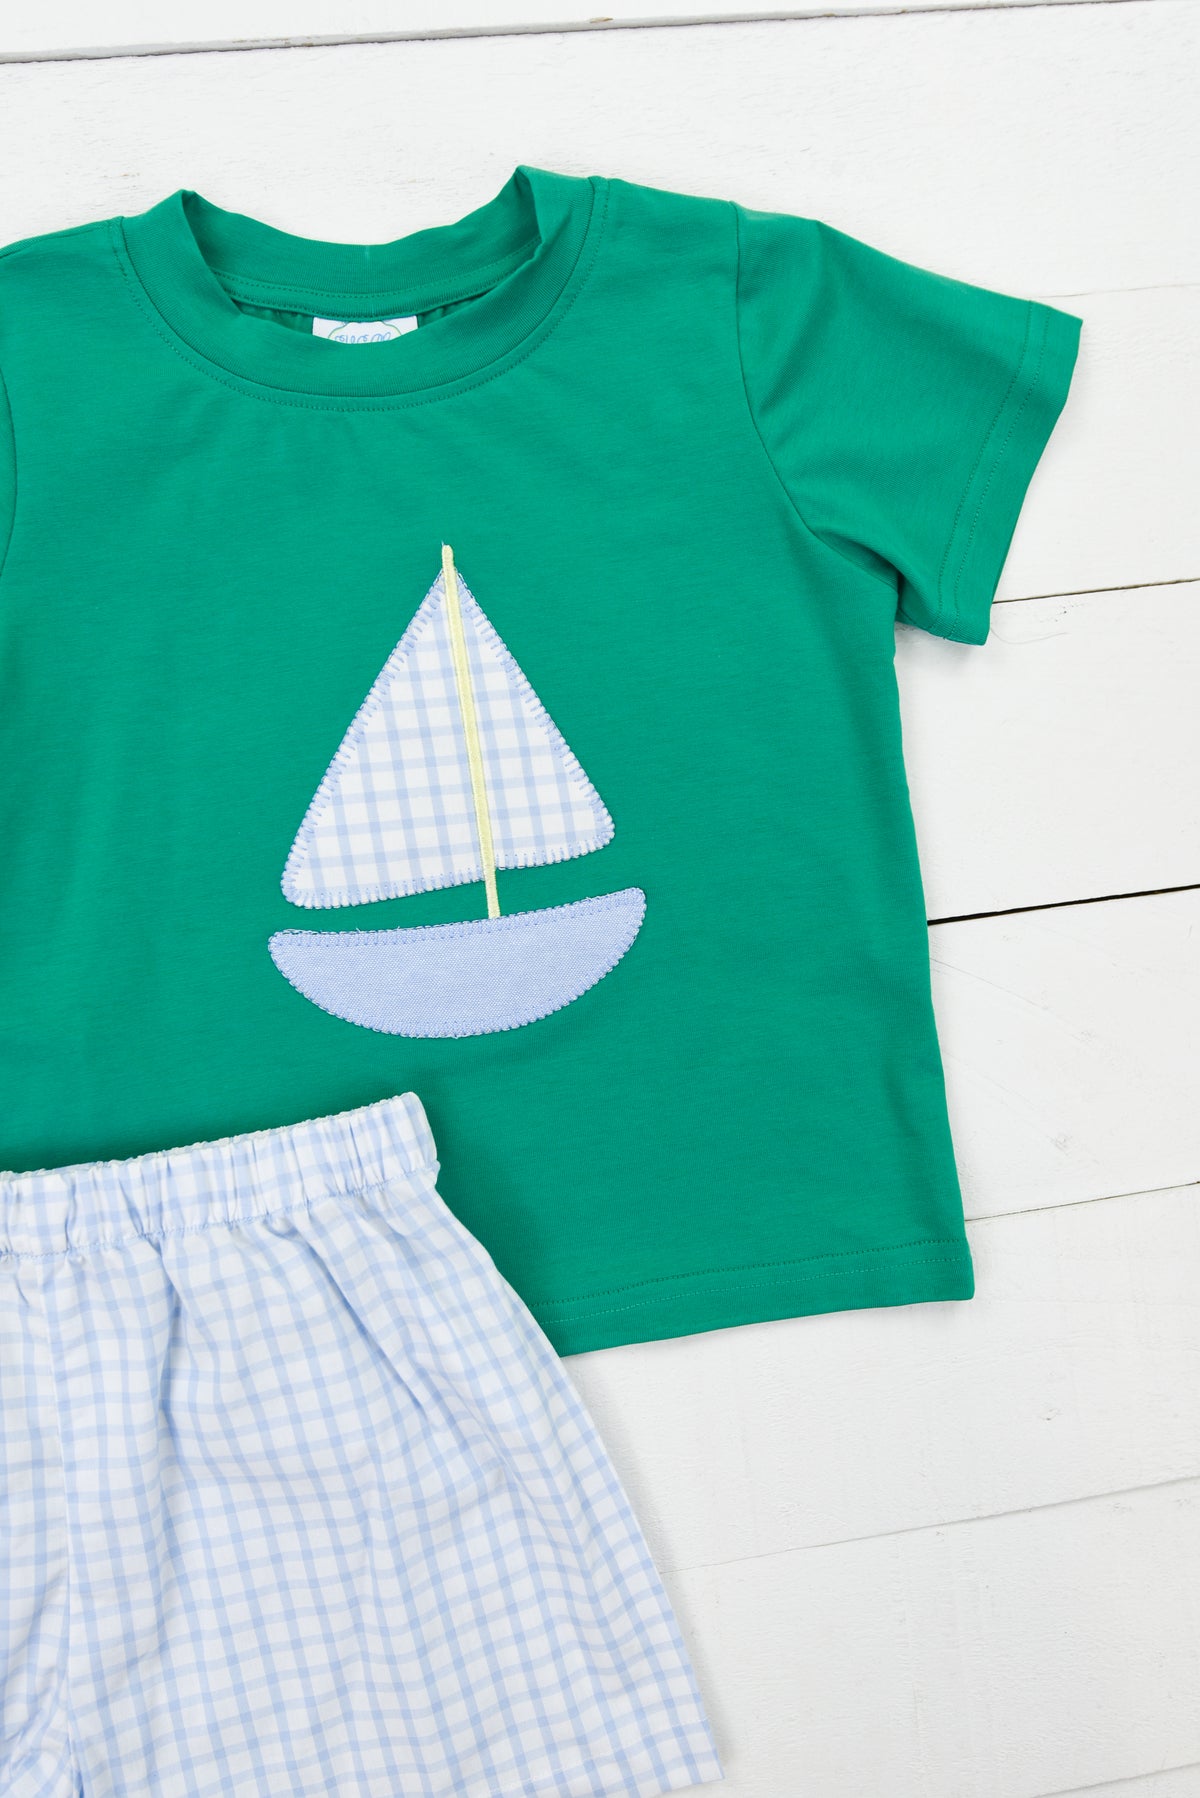 a green shirt and shorts with a sailboat on it